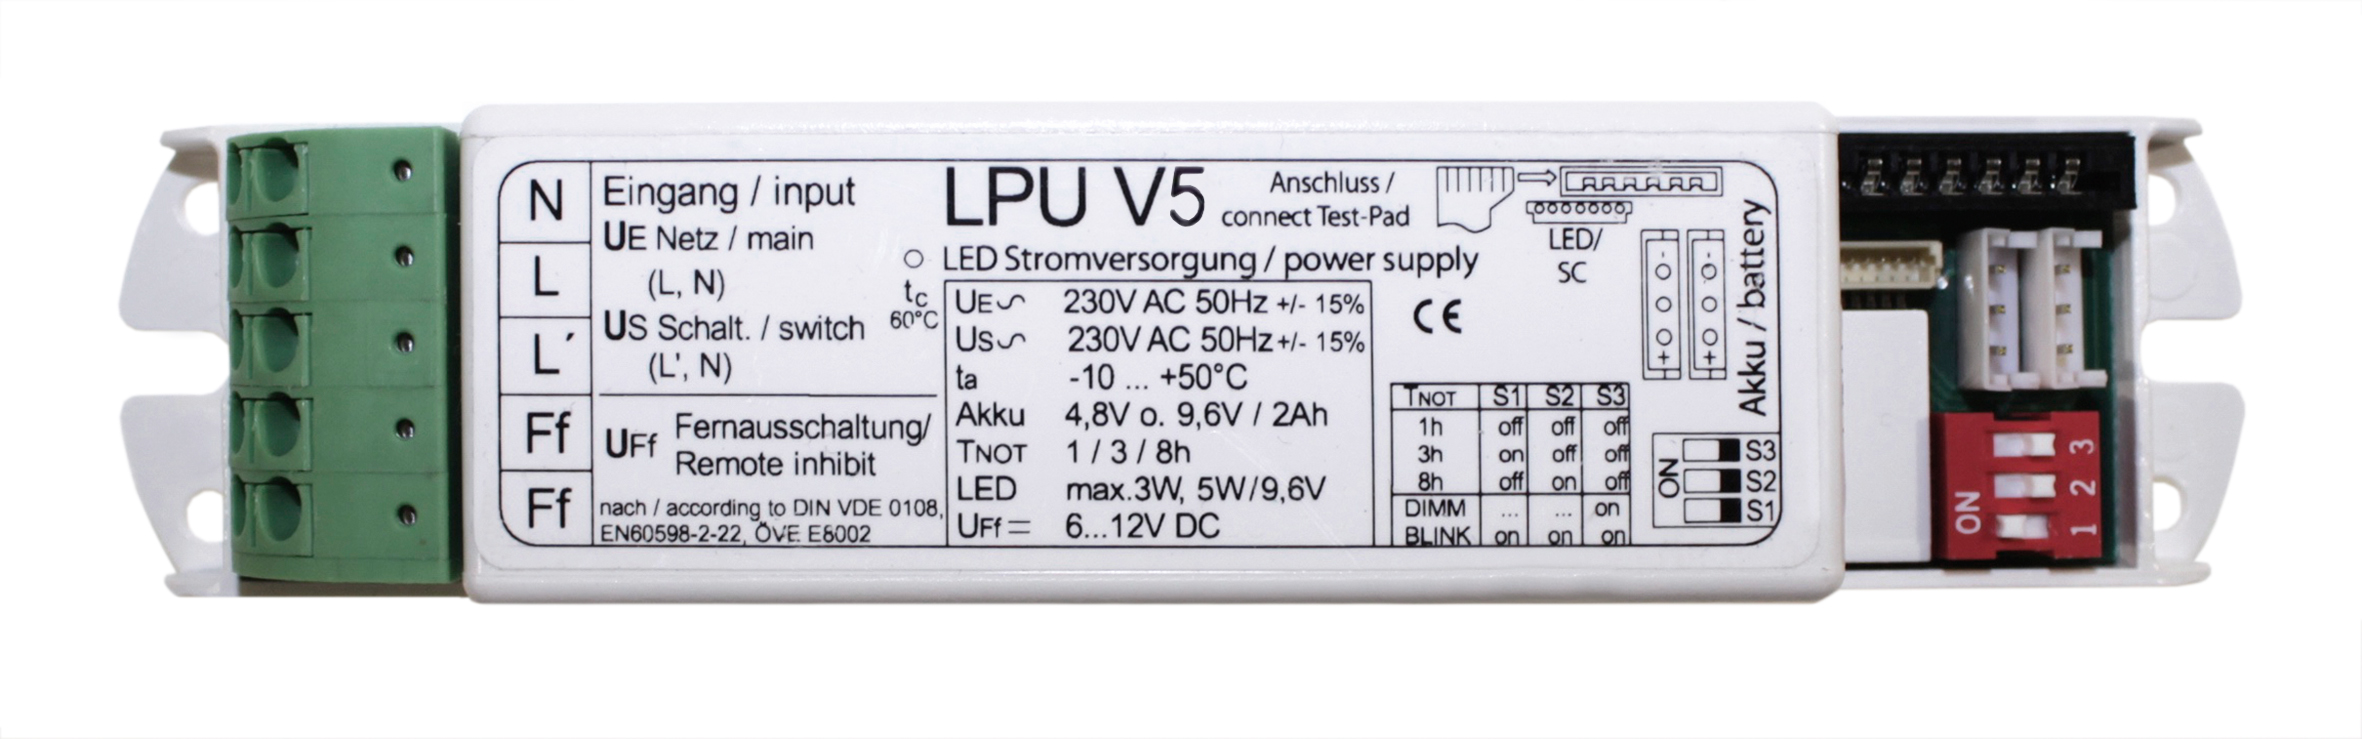 Processor controlled emergency light unit for LED luminaires